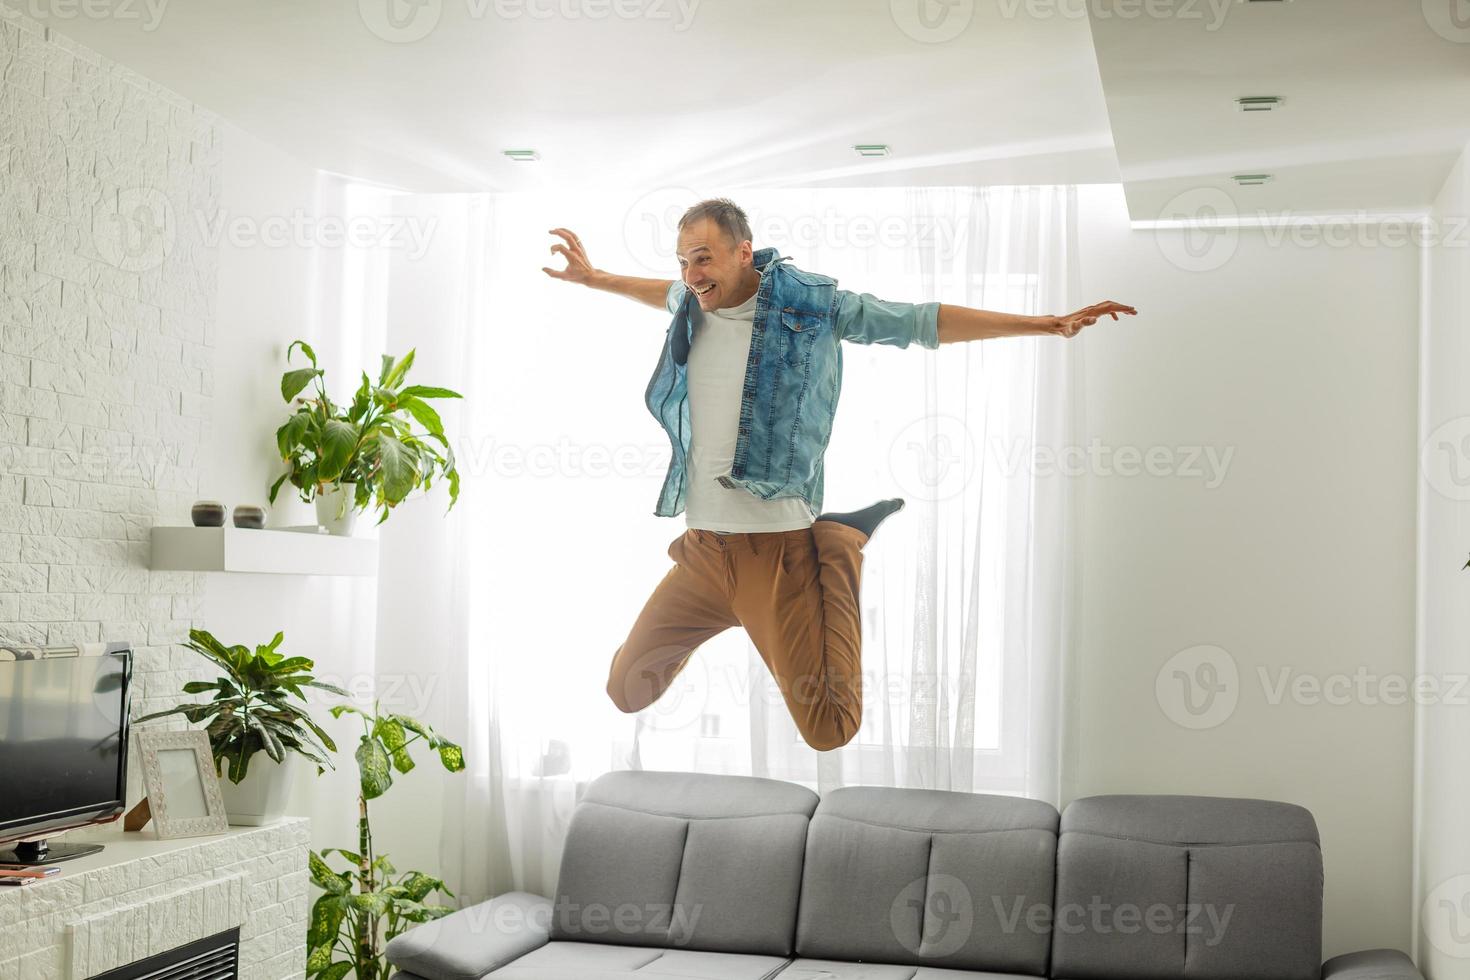 Caucasian man looks happy while dancing on the couch in the living room, the man jumps off the couch. Shot at home photo